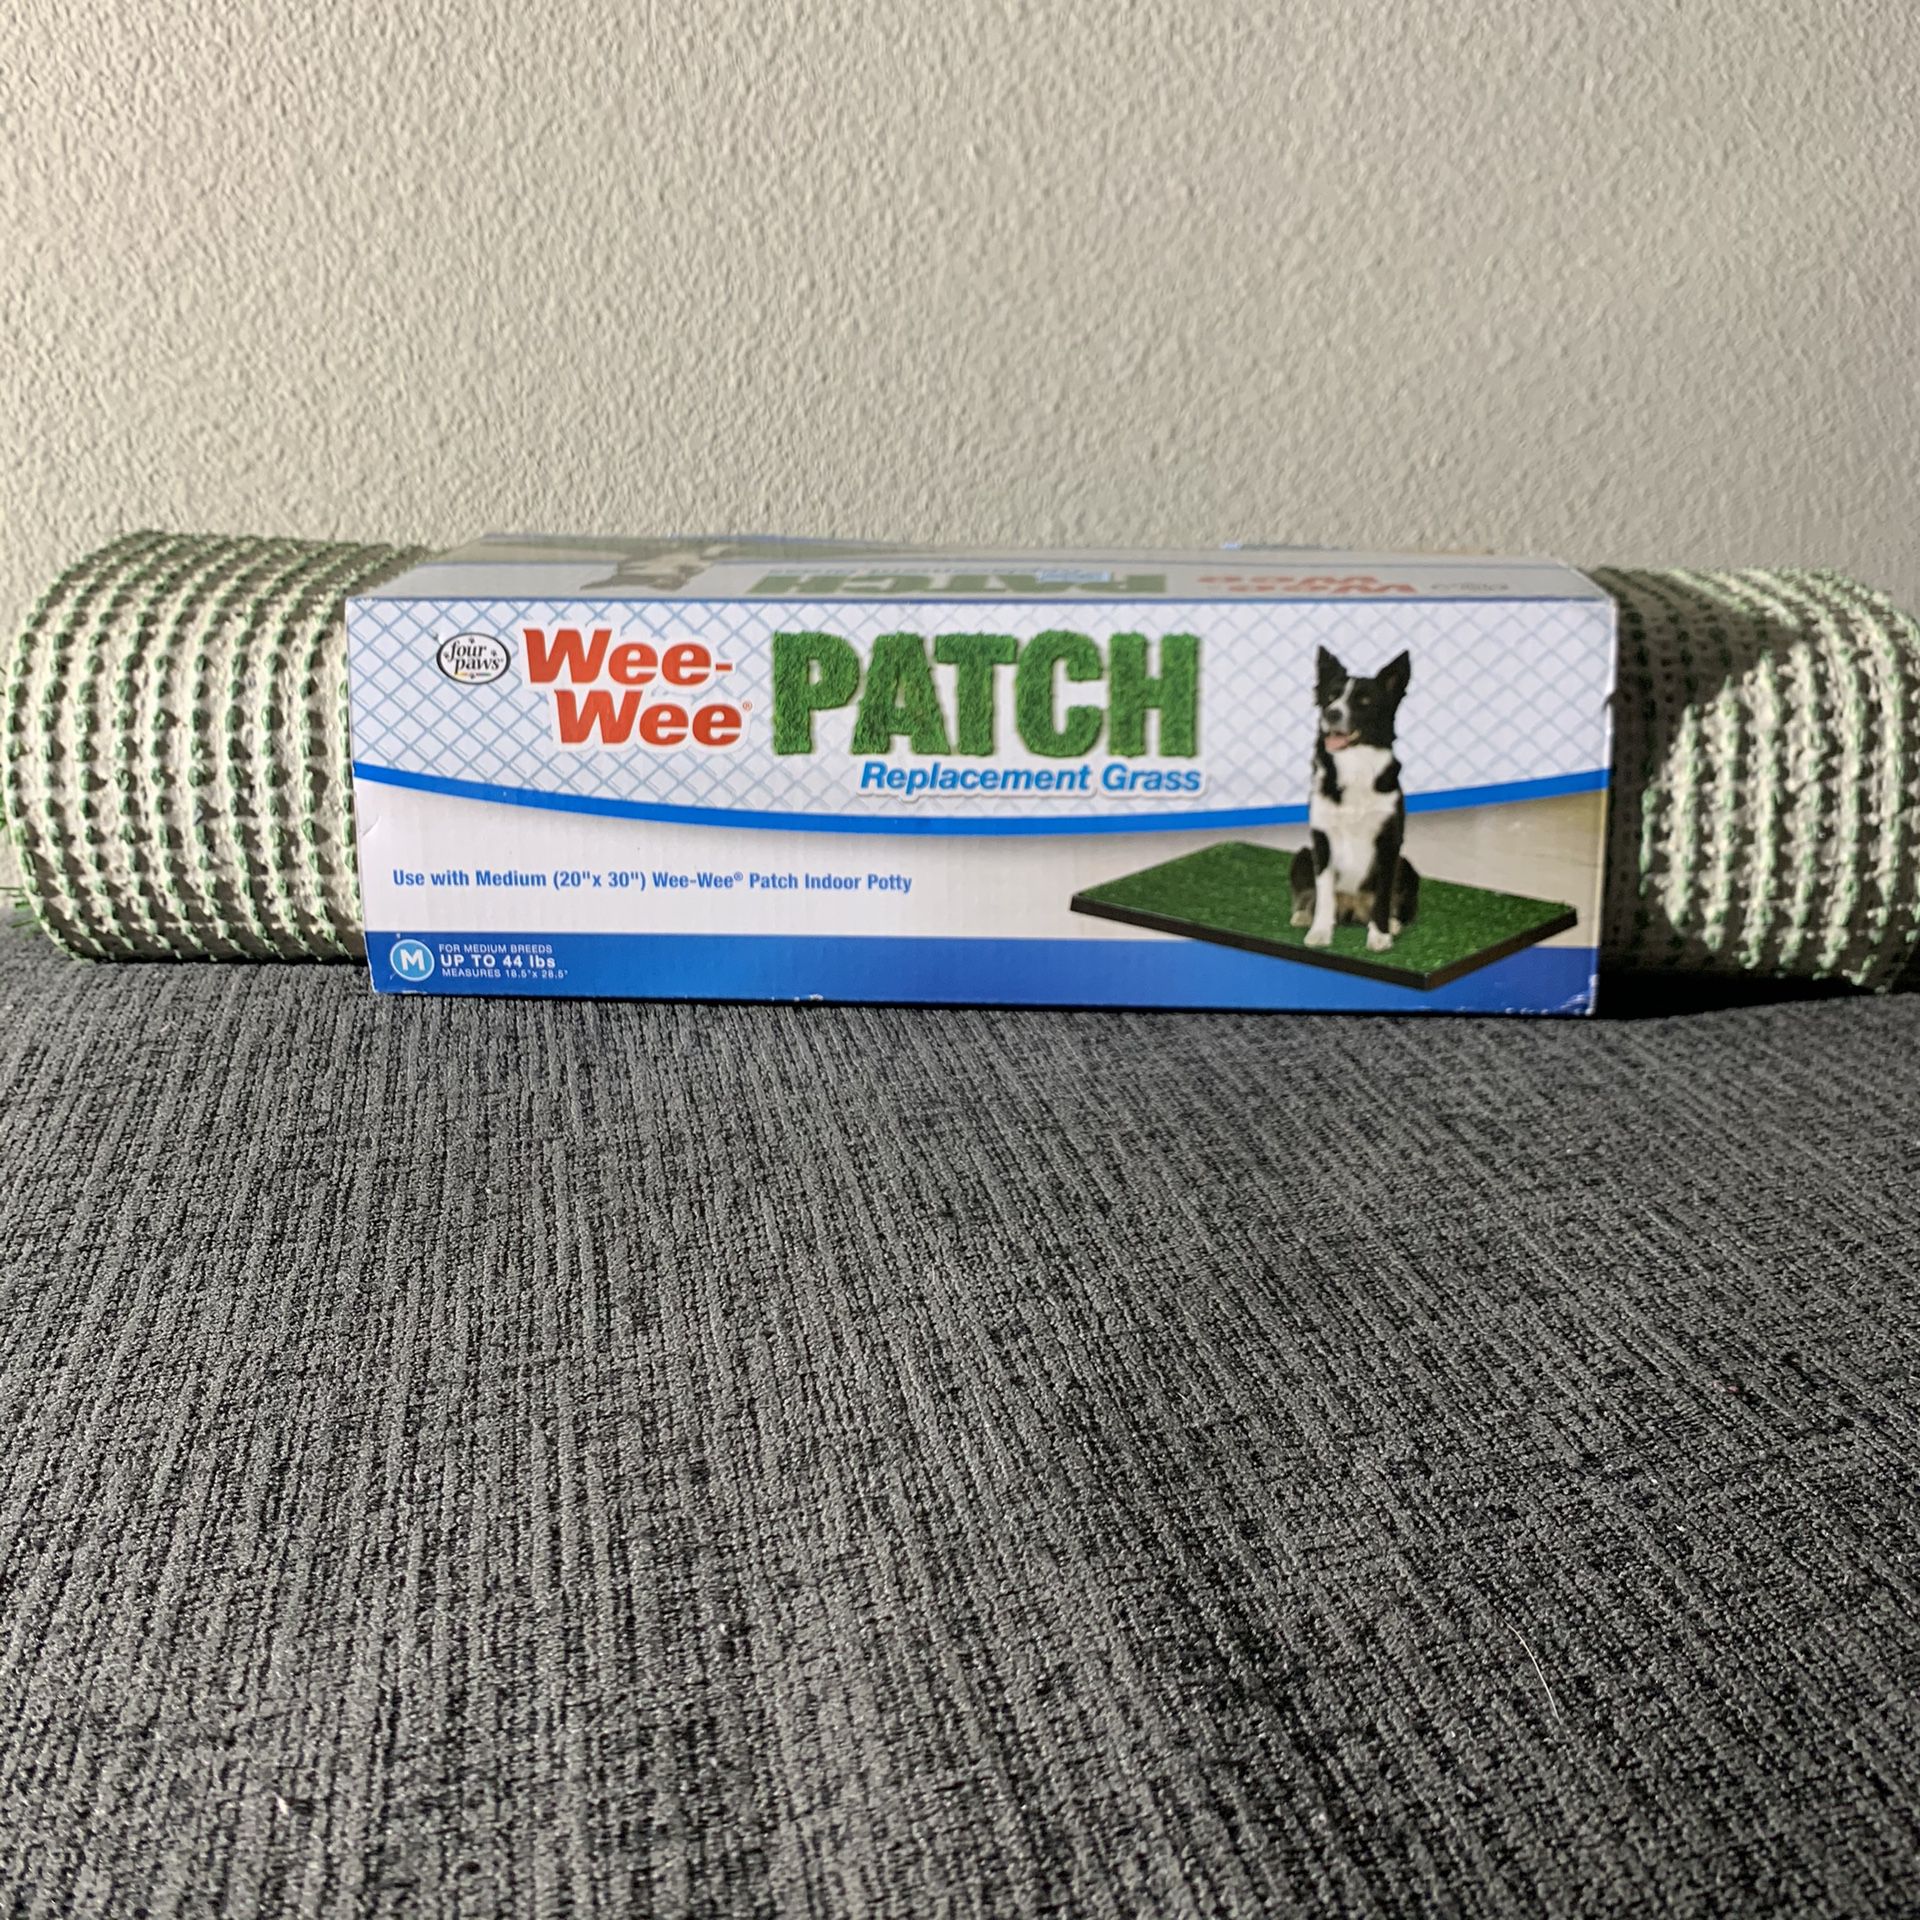 Four Paws Original Medium Wee Wee Patch Replacement Grass (20" Long x 30" Wide)